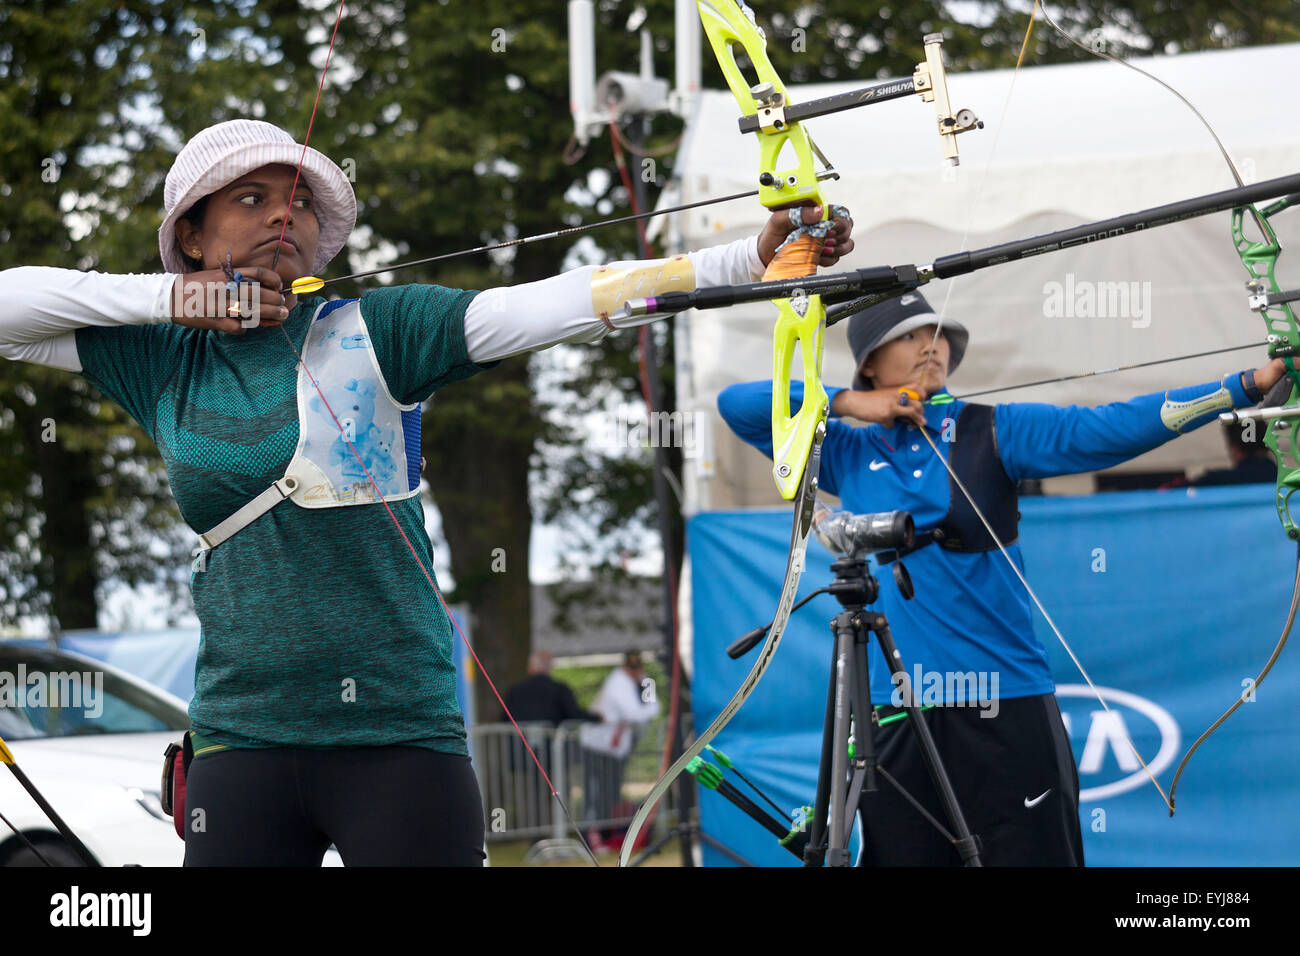 Copenhagen, Denmark, July 30th, 2015: Indian archer Laxmirani  Mahji (L) and Shih-Chia Lin  competes in the World Archery Championships in Copenhagen during Thursday's individual matches  in recurve bow. Credit:  OJPHOTOS/Alamy Live News Stock Photo